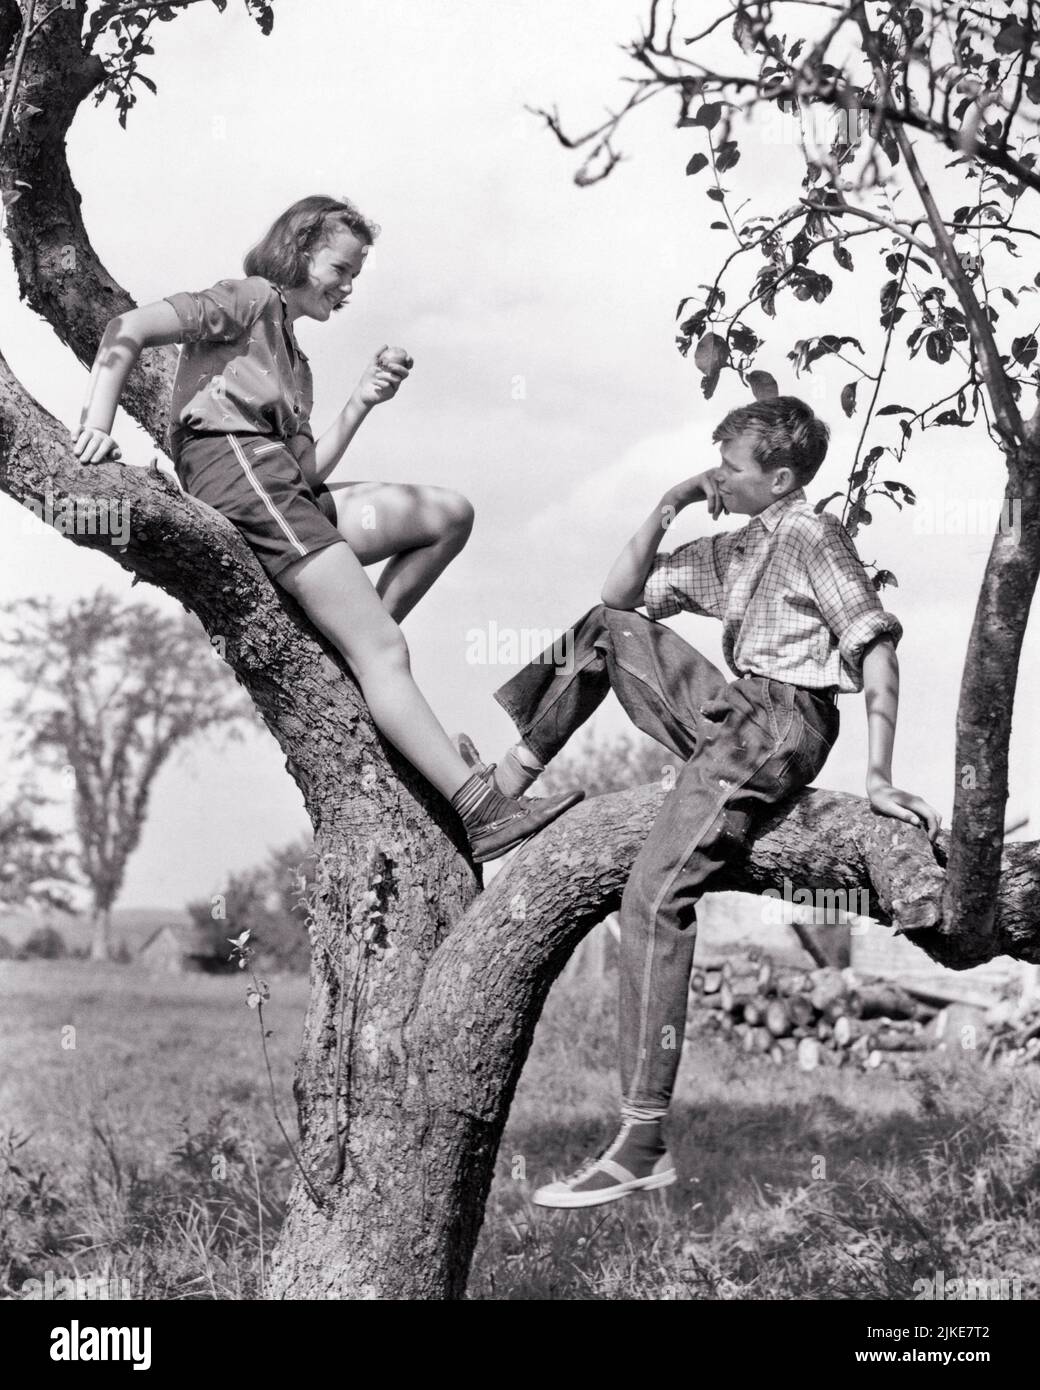 1930s TEENAGE BOY & GIRL TALKING SITTING TREE GIRL EATING APPLE WEARING SHORTS BOY WEARING BLUE JEANS LISTENING LOOKING AT HER - j2094 HAR001 HARS OLD FASHION SHORTS JUVENILE STYLE FRIEND COTTON JOY LIFESTYLE FEMALES RURAL HEALTHINESS HOME LIFE COPY SPACE FRIENDSHIP FULL-LENGTH PERSONS FARMING MALES TEENAGE GIRL TEENAGE BOY CONFIDENCE DENIM AGRICULTURE B&W SUMMERTIME HAPPINESS LEISURE FARMERS RECREATION ORCHARD RELATIONSHIPS CONNECTION MOTION BLUR CONCEPTUAL FRIENDLY TEENAGED APPLE TREE THOUGHTFULLY BLUE JEANS COOPERATION GROWTH INFORMAL PRE-TEEN PRE-TEEN BOY PRE-TEEN GIRL SEASON TOGETHERNESS Stock Photo